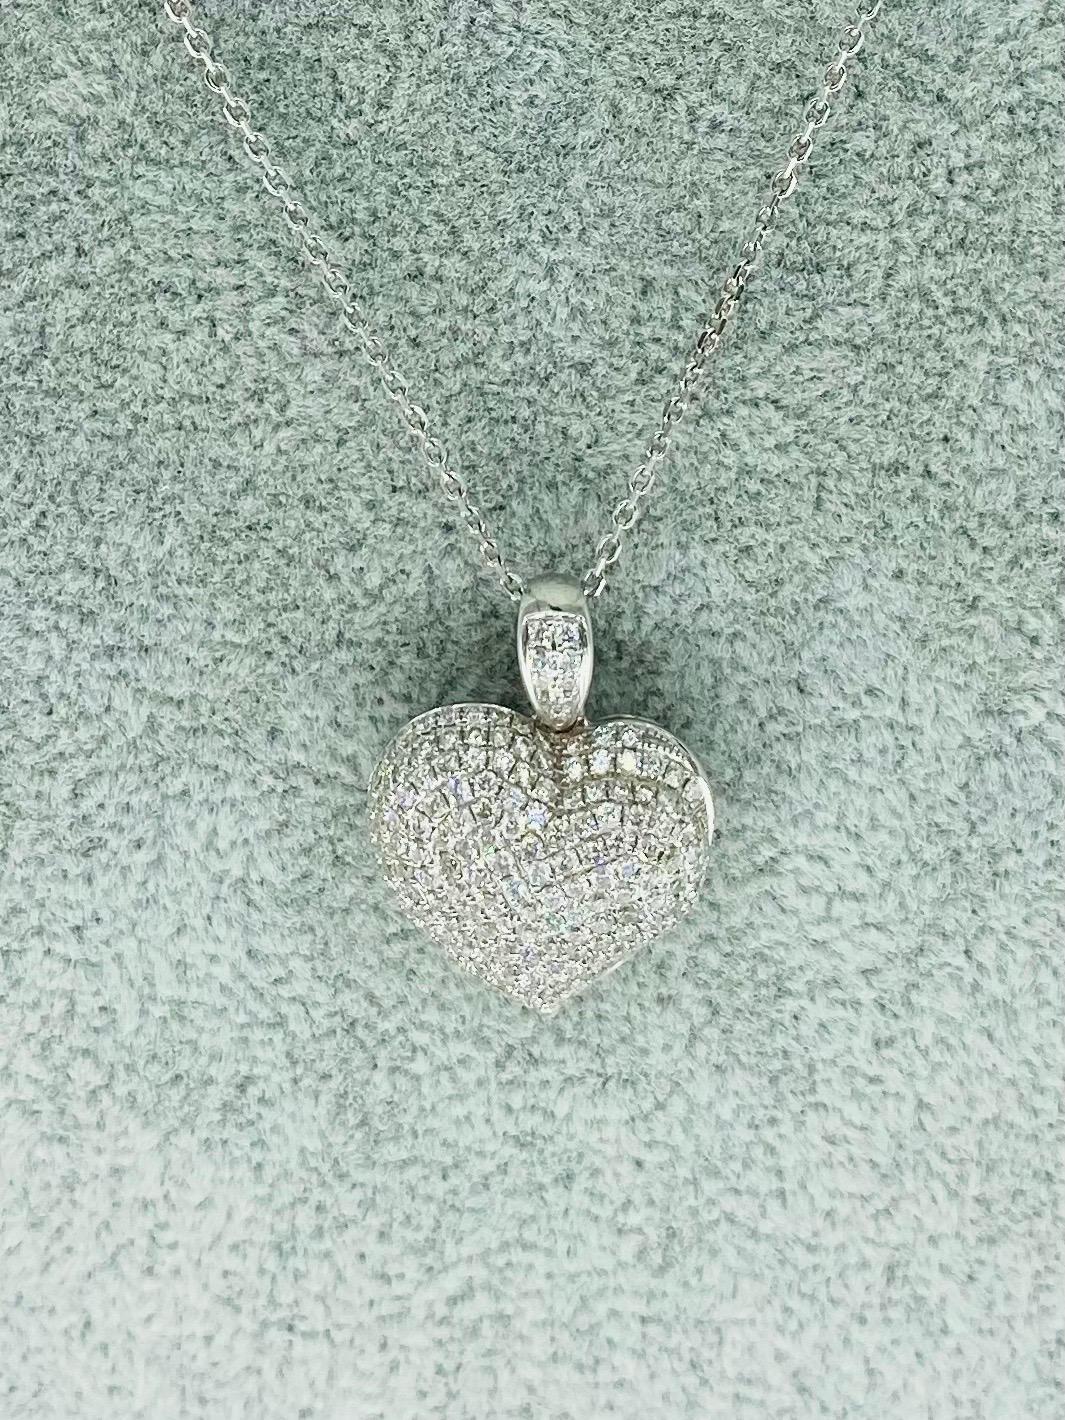 7.50 Carat Diamonds 3D Heart Love Pendant Necklace
The pendant is made in 18k solid white gold and features approx 7.50 carat of high clarity white color diamonds. The pendant measures 24mm X 18mm and weights 7.6 grams gold. The necklace that’s